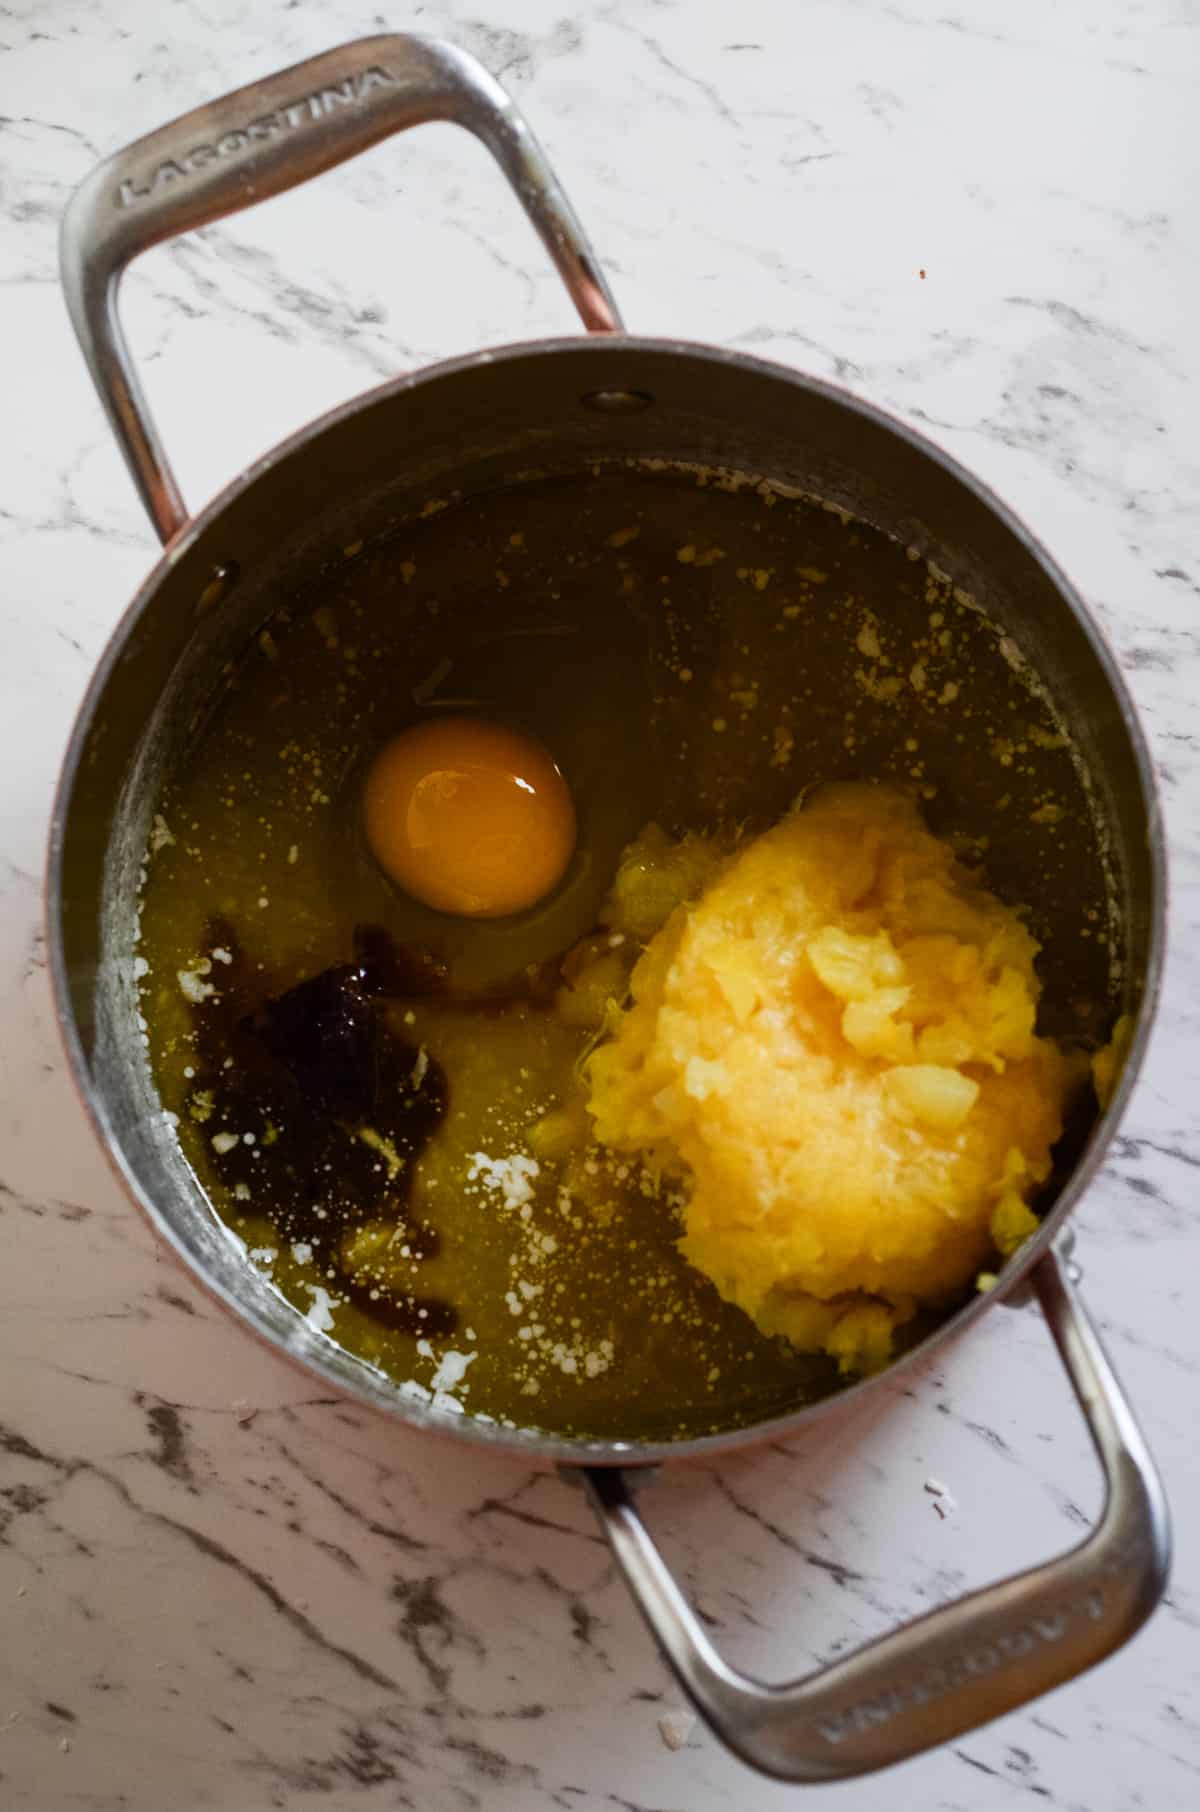 Melted butter, egg, crushed pineapple, and vanilla in a pot.